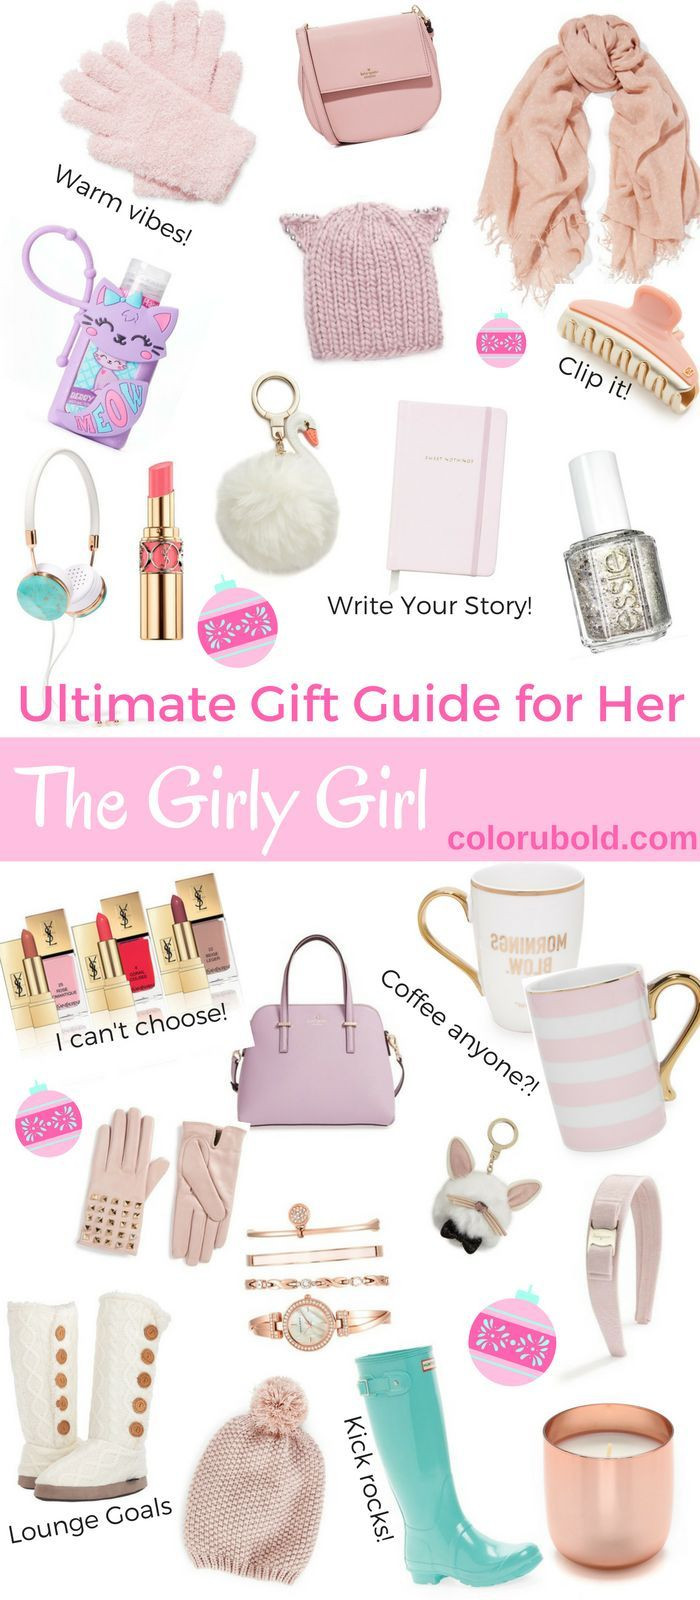 Birthday Gifts For Teenage Girls
 The Ultimate Gift Guide for the Girly Girl